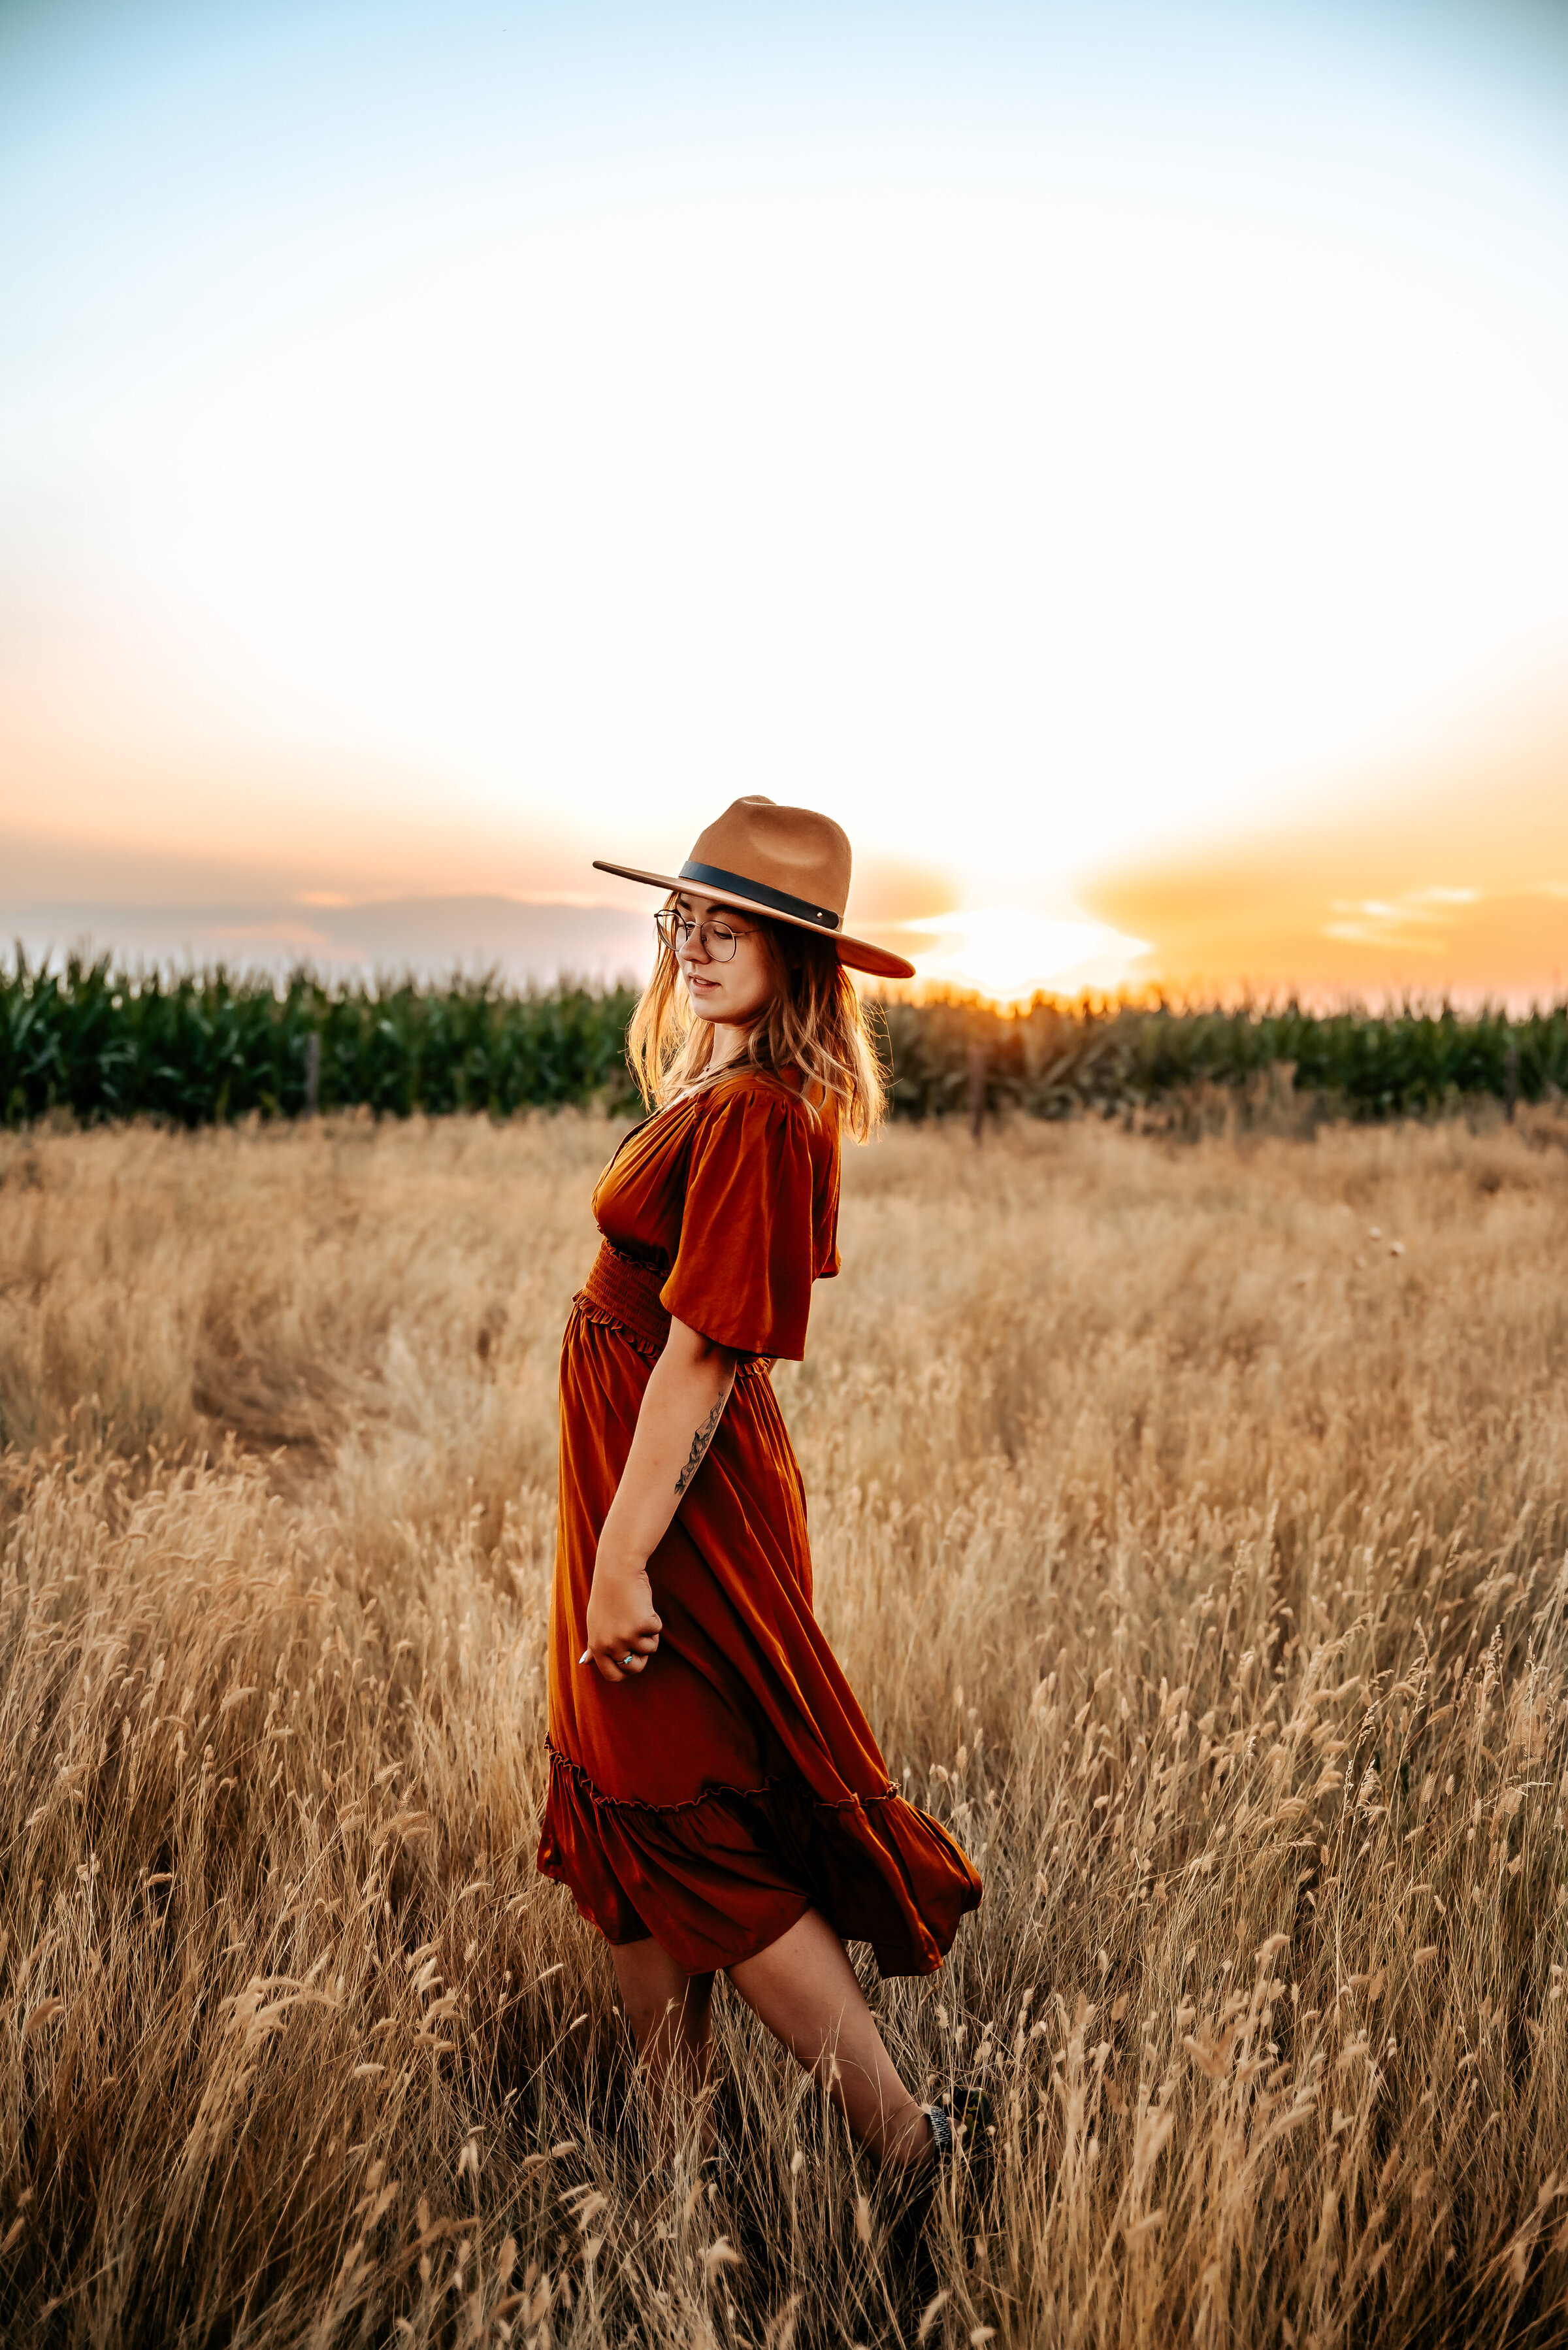 Girl spins in field in orange dress with hat on